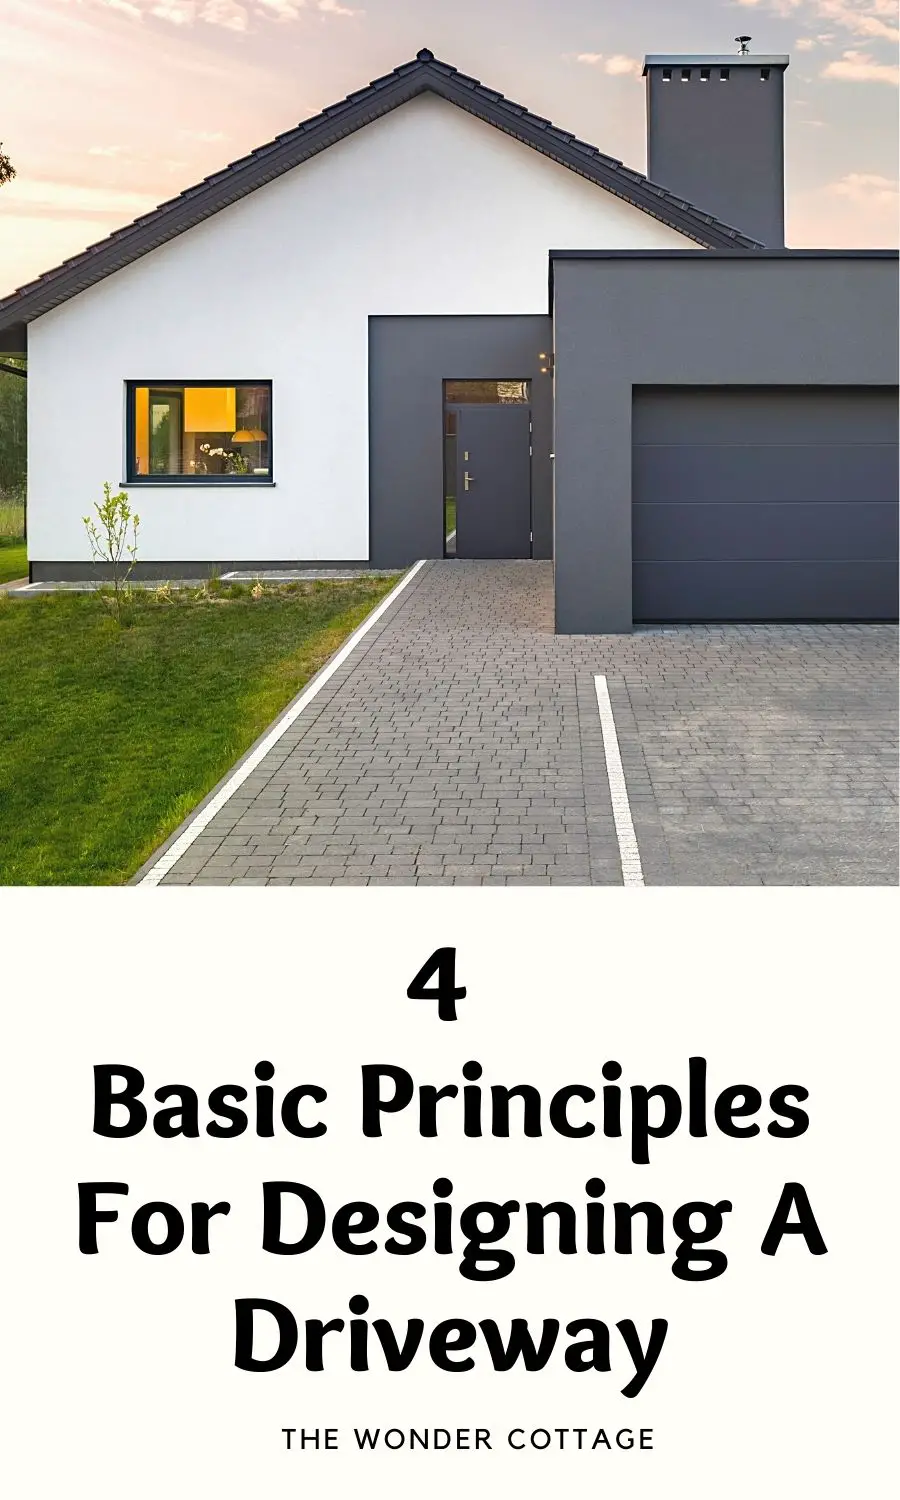 Basic principles for designing a driveway